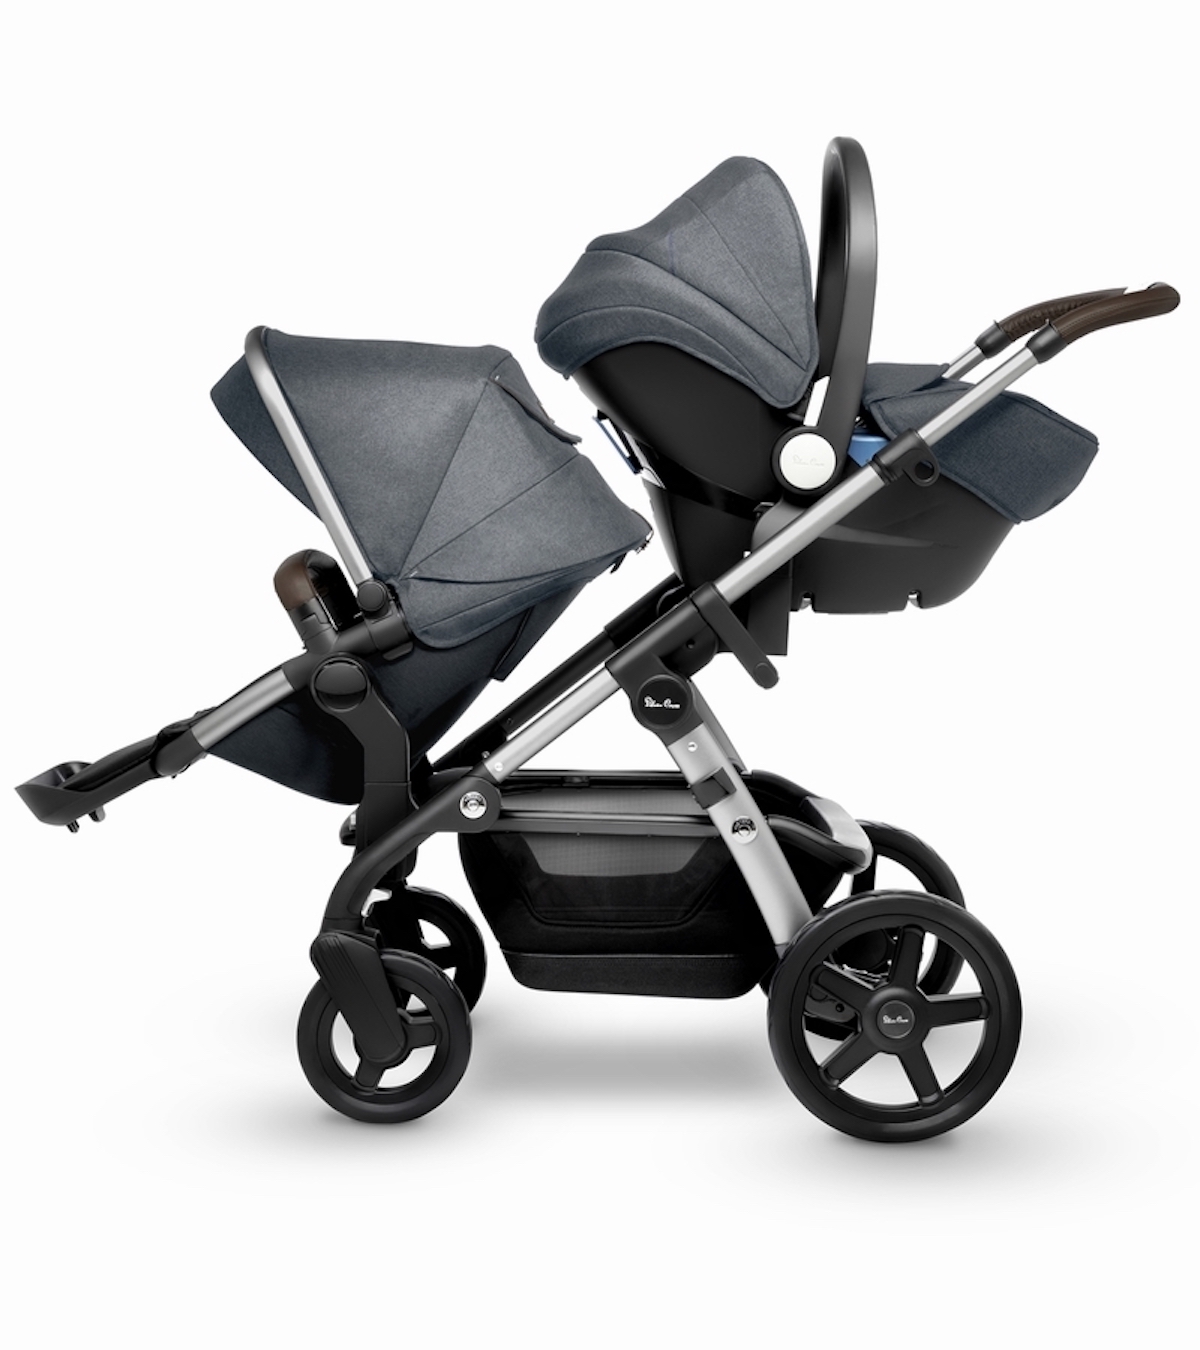 wave double stroller